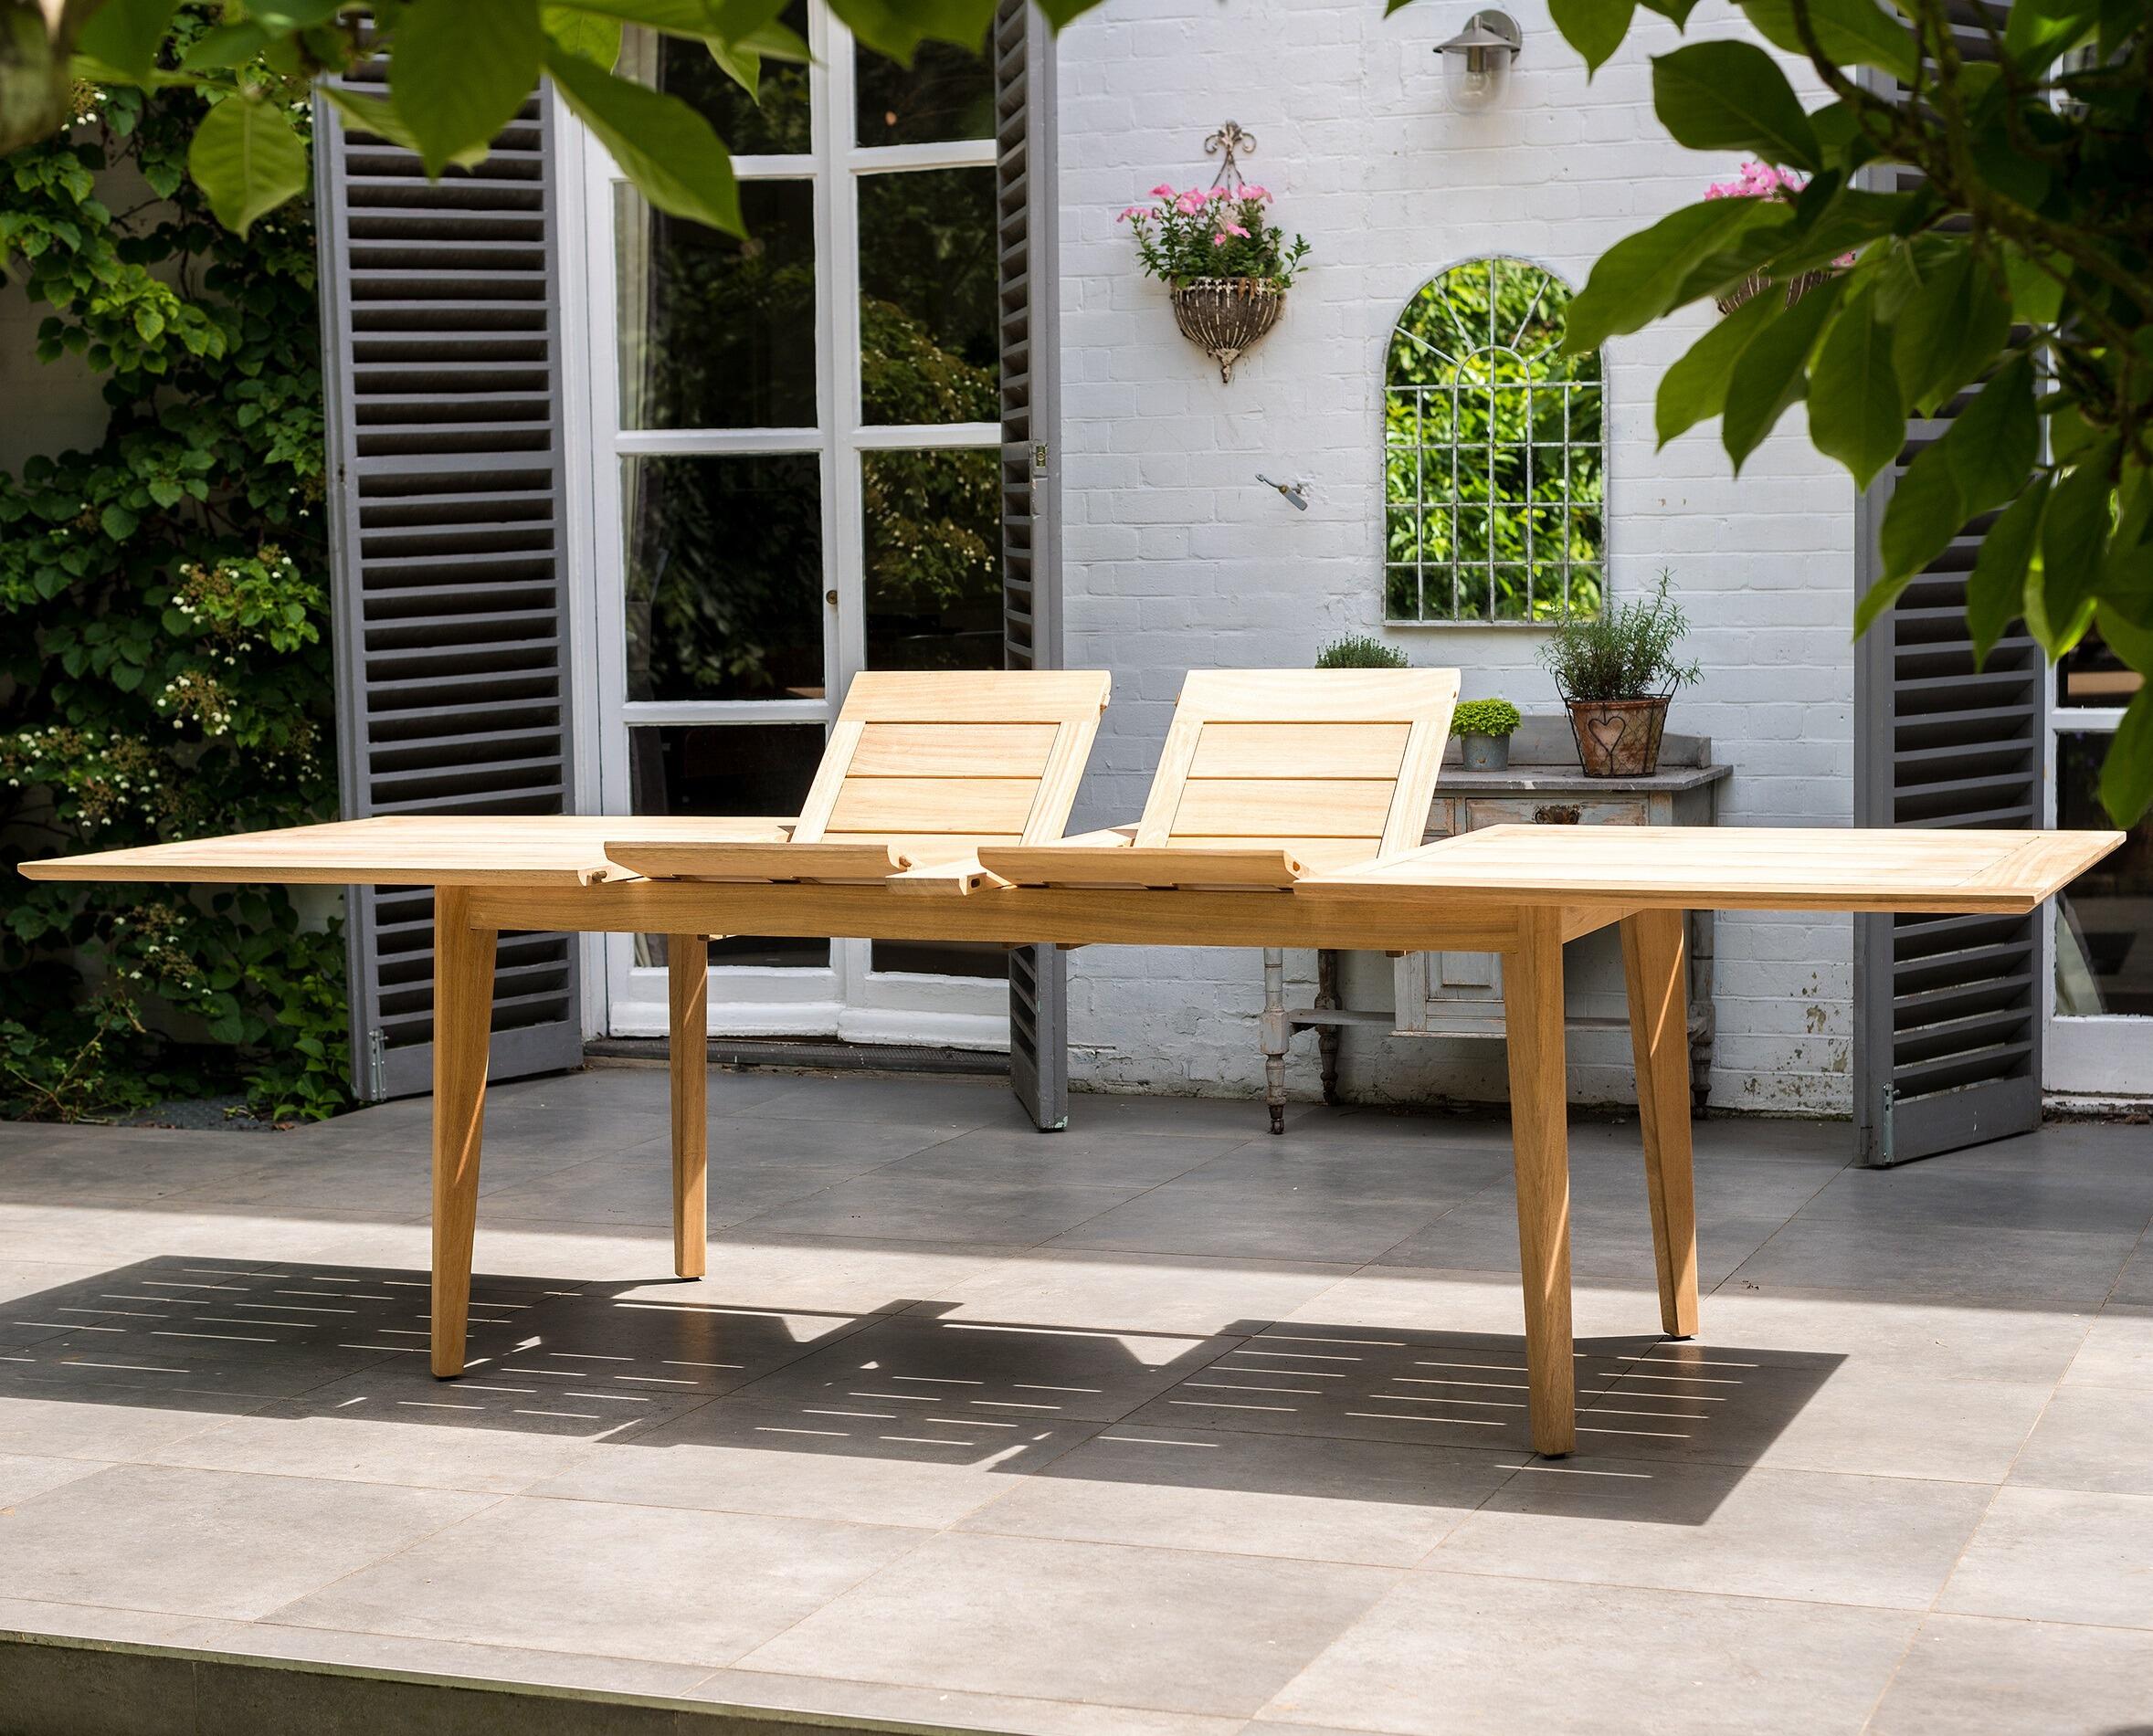 extending garden dining table outdoor all weather hardwood roble mid century modern design